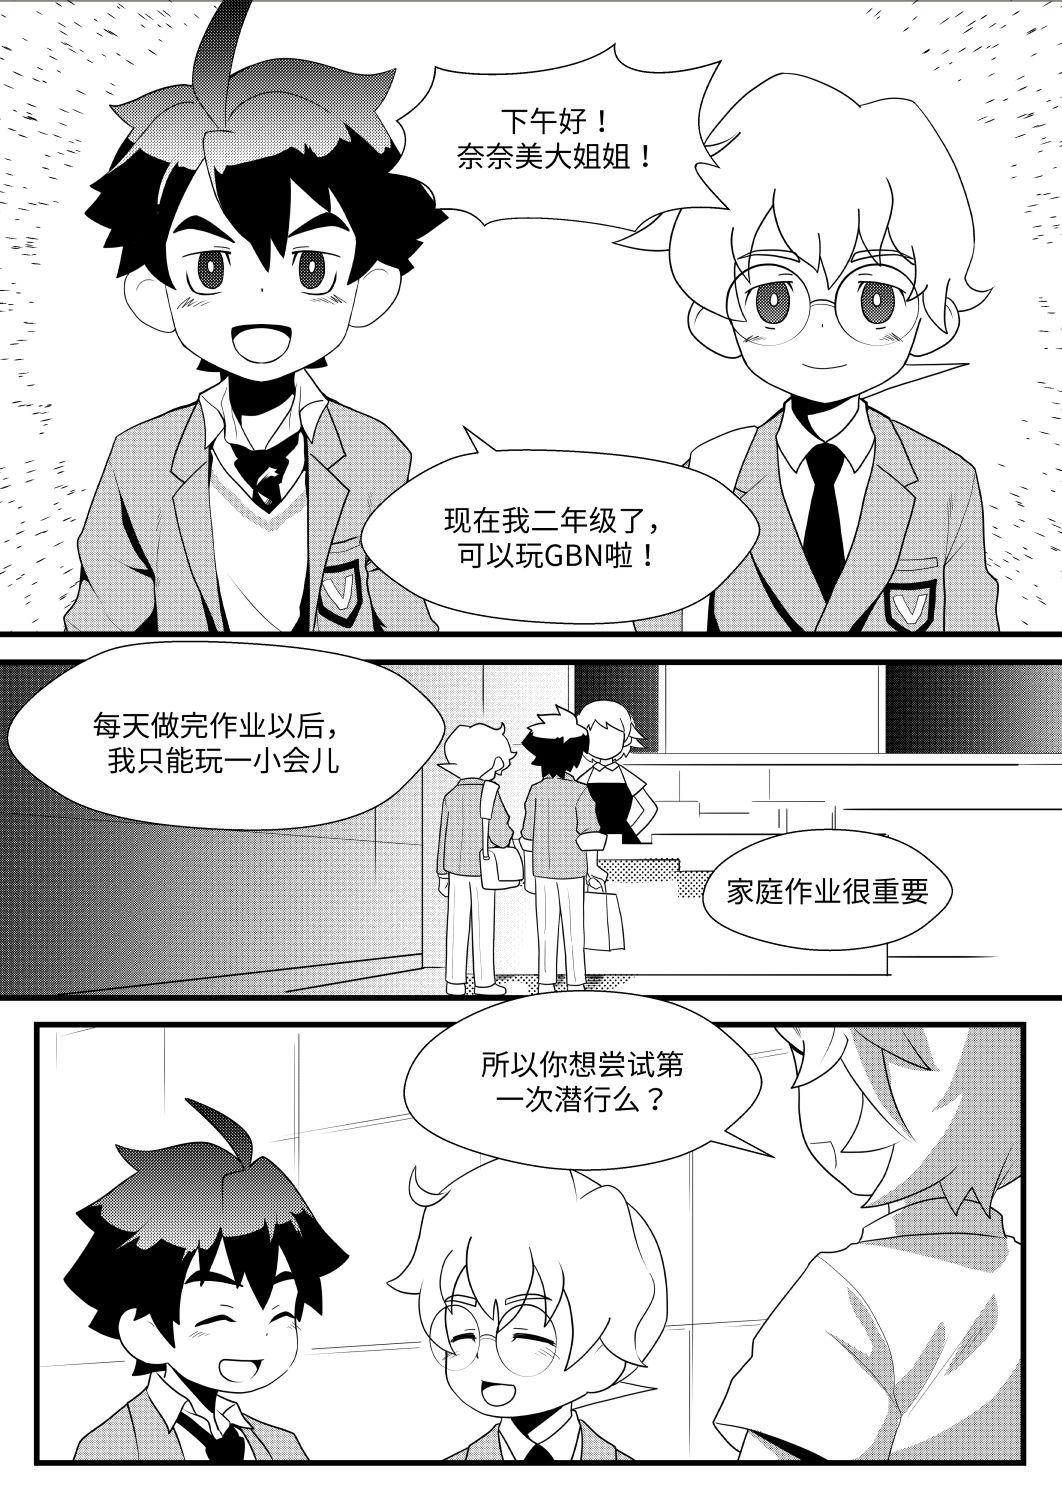 Celeb Welcome to GBN | 欢迎来到GBN - Gundam build divers Gays - Page 3